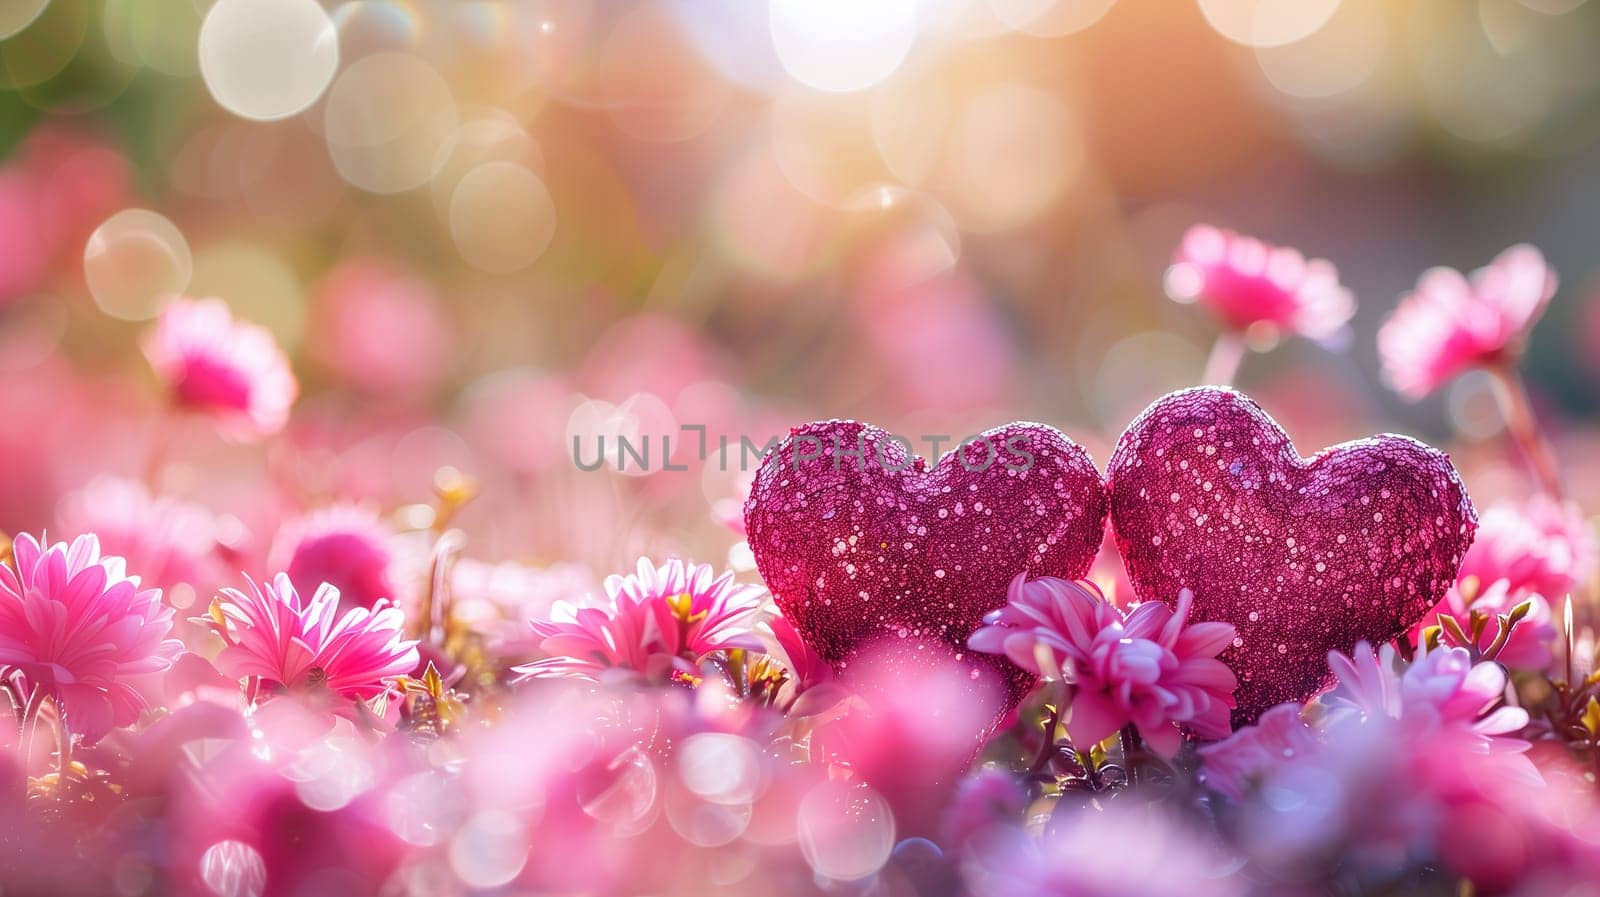 Three sparkling hearts stand amidst a vivid field of blooming pink flowers, symbolizing love and appreciation during an International Mothers Day concert. The warm glow of sunlight filters through, enhancing the festive and affectionate atmosphere of the event.